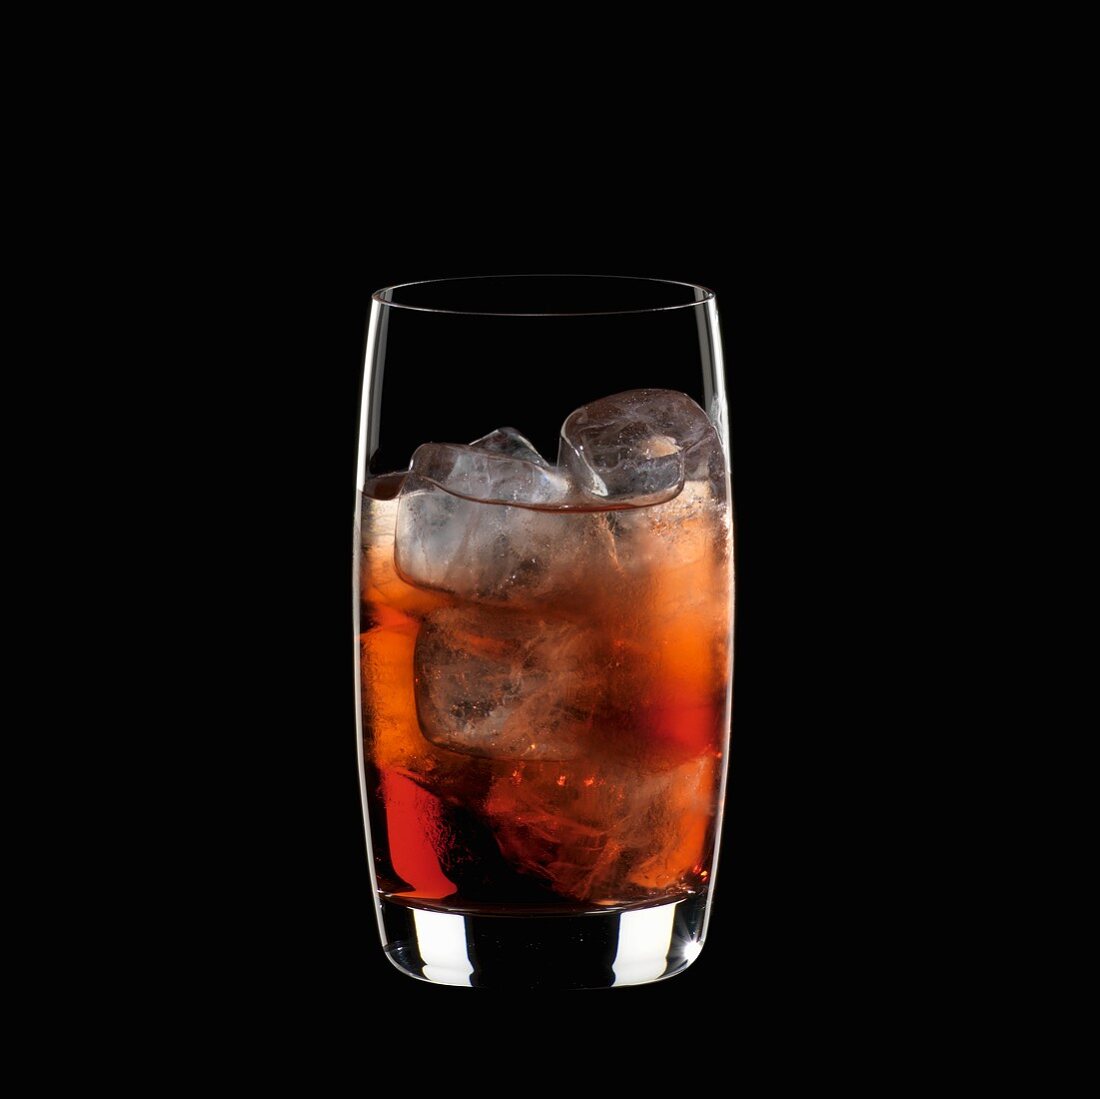 A glass of Campari Soda with ice cubes